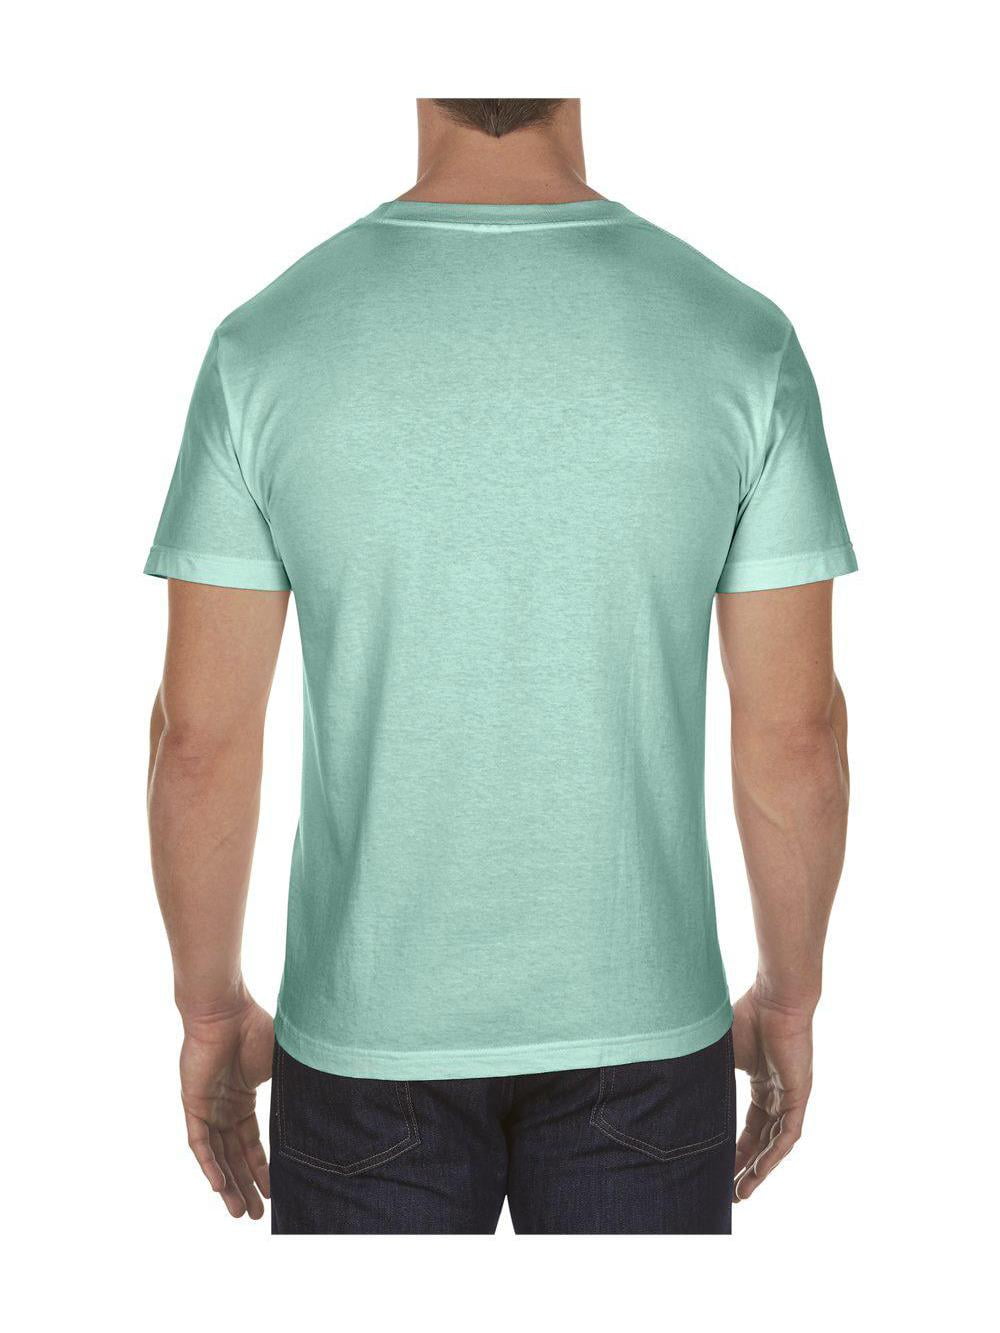 ALSTYLE Forest Classic Green S T-Shirt 1301